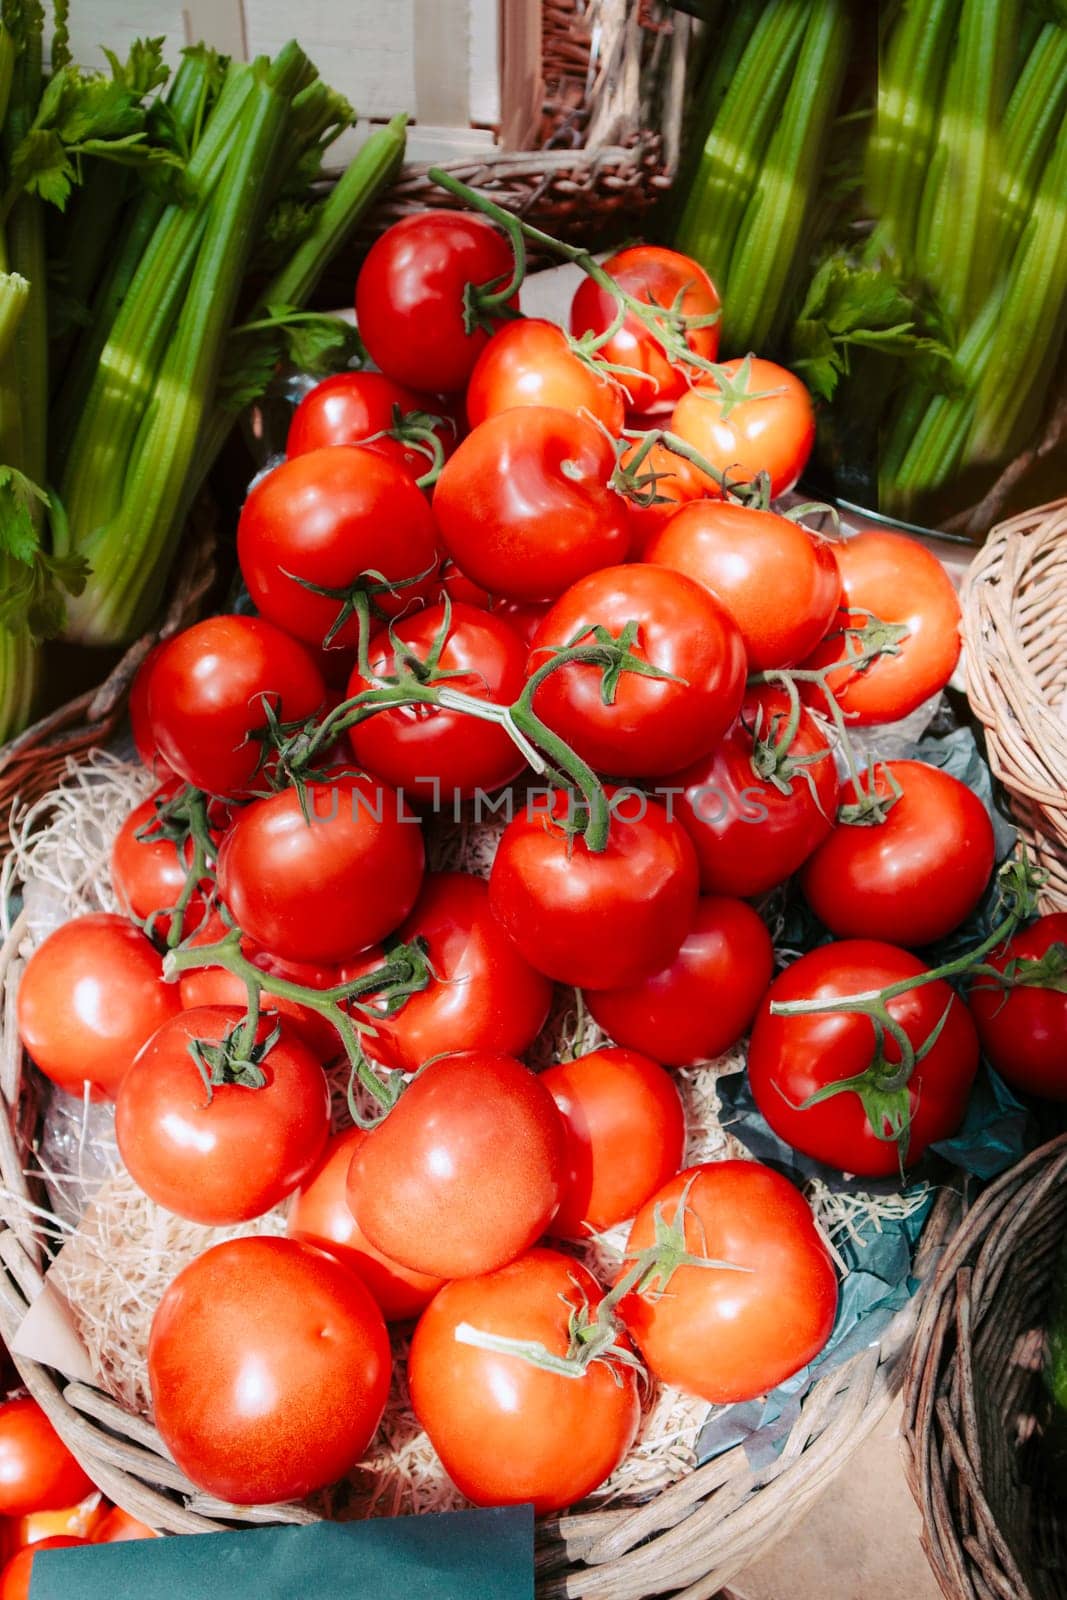 Tomatoes sold at an open green market, overhead view